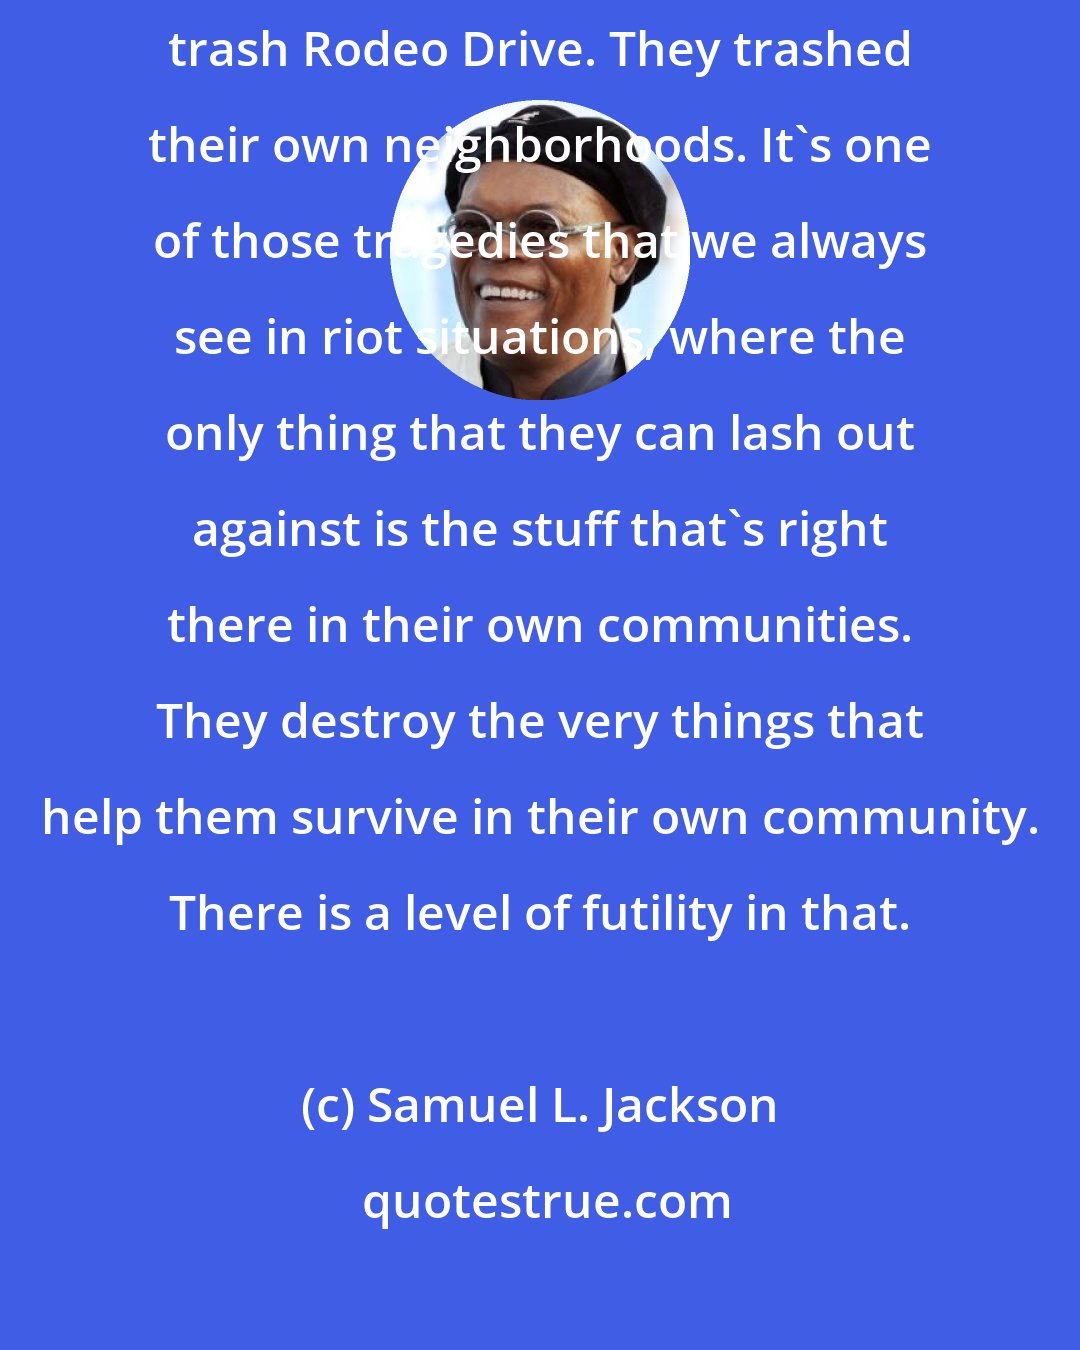 Samuel L. Jackson: When the riots happened in L.A., they didn't go to Beverly Hills to trash Rodeo Drive. They trashed their own neighborhoods. It's one of those tragedies that we always see in riot situations, where the only thing that they can lash out against is the stuff that's right there in their own communities. They destroy the very things that help them survive in their own community. There is a level of futility in that.